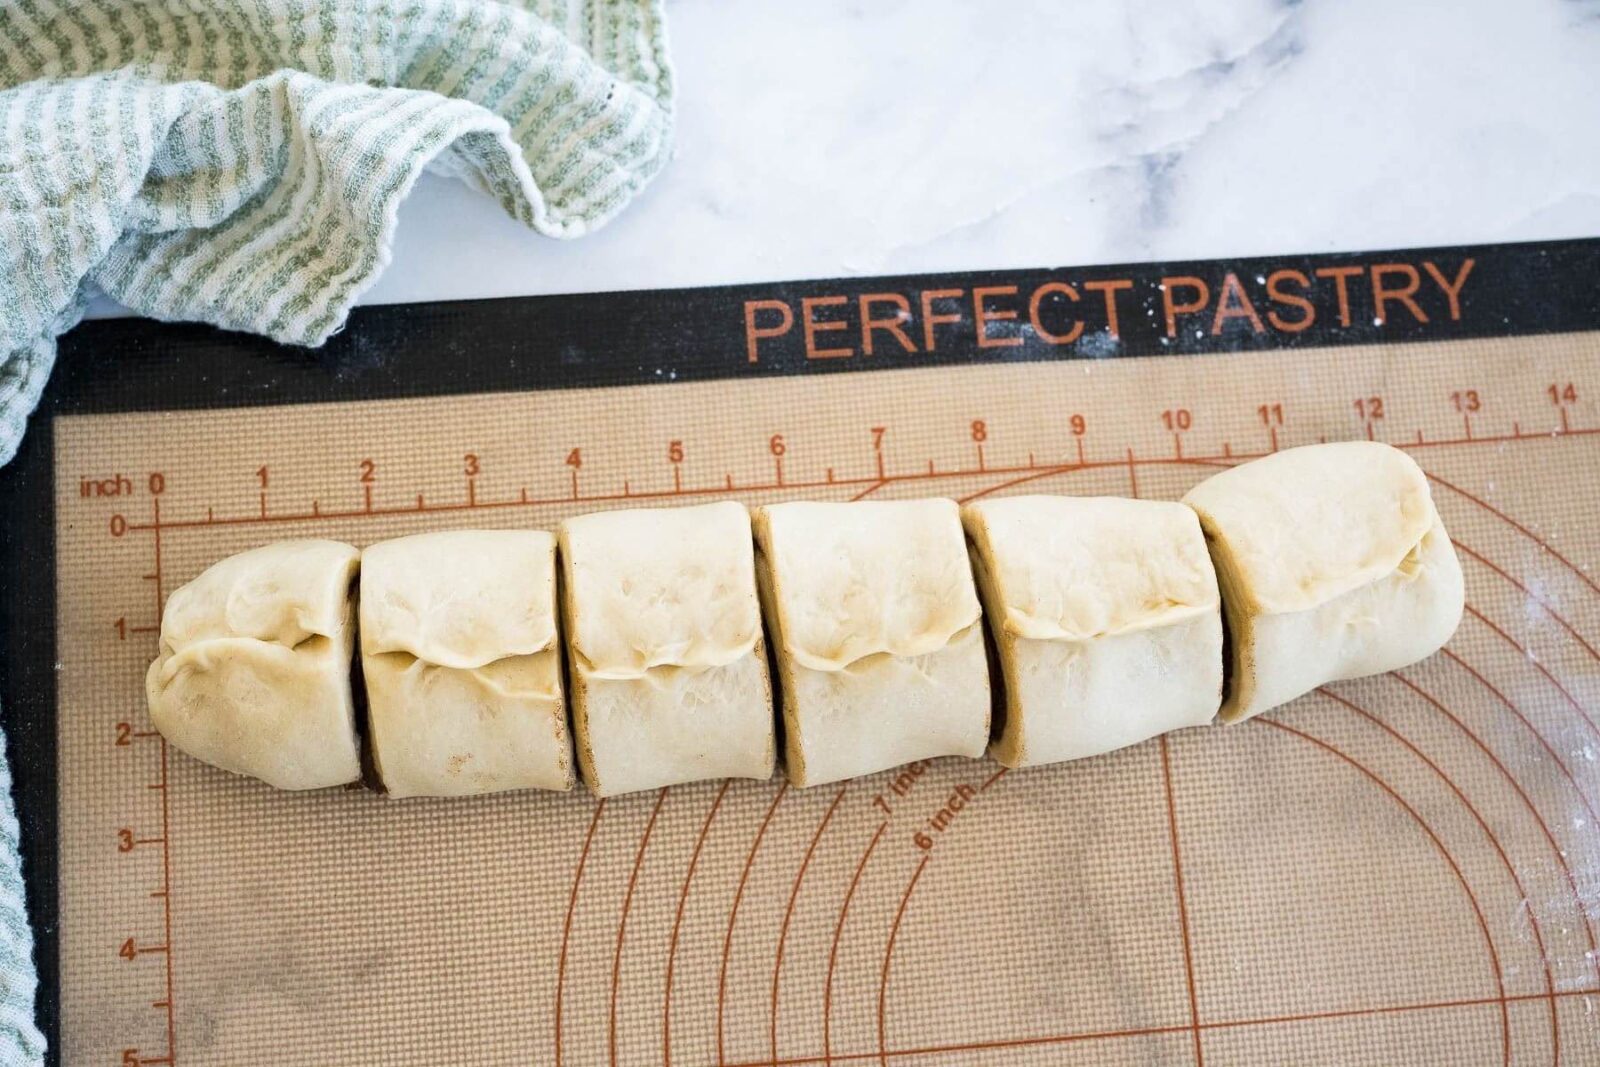 A rolled log of dough is sliced into 6 sections on a cutting board.